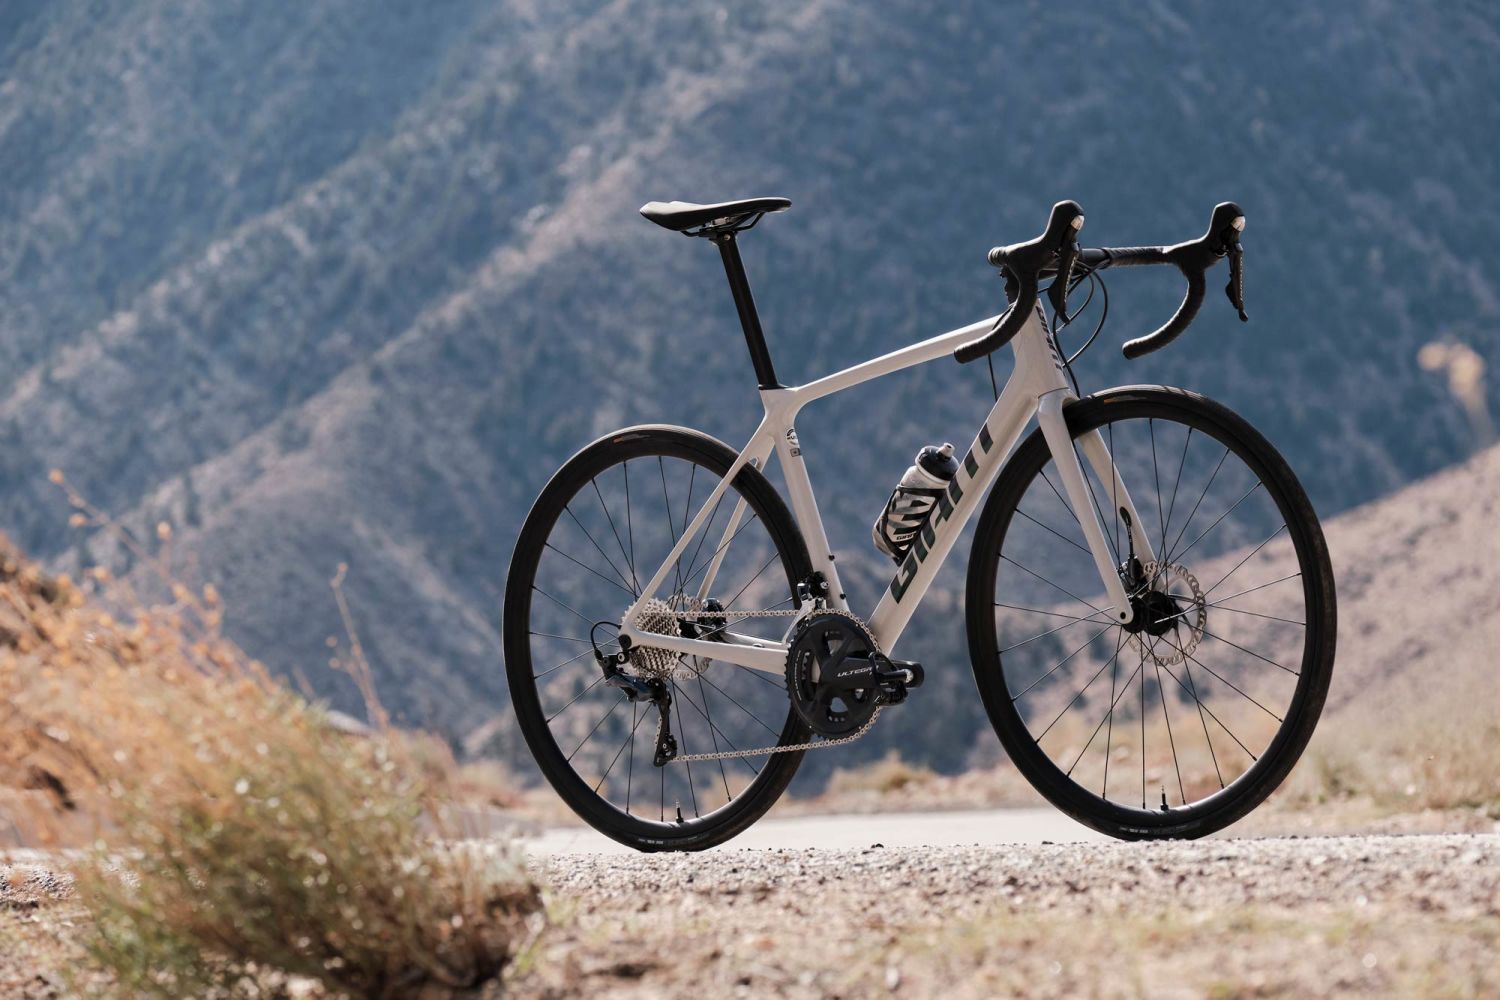 giant tcr advanced 1 disc pro compact